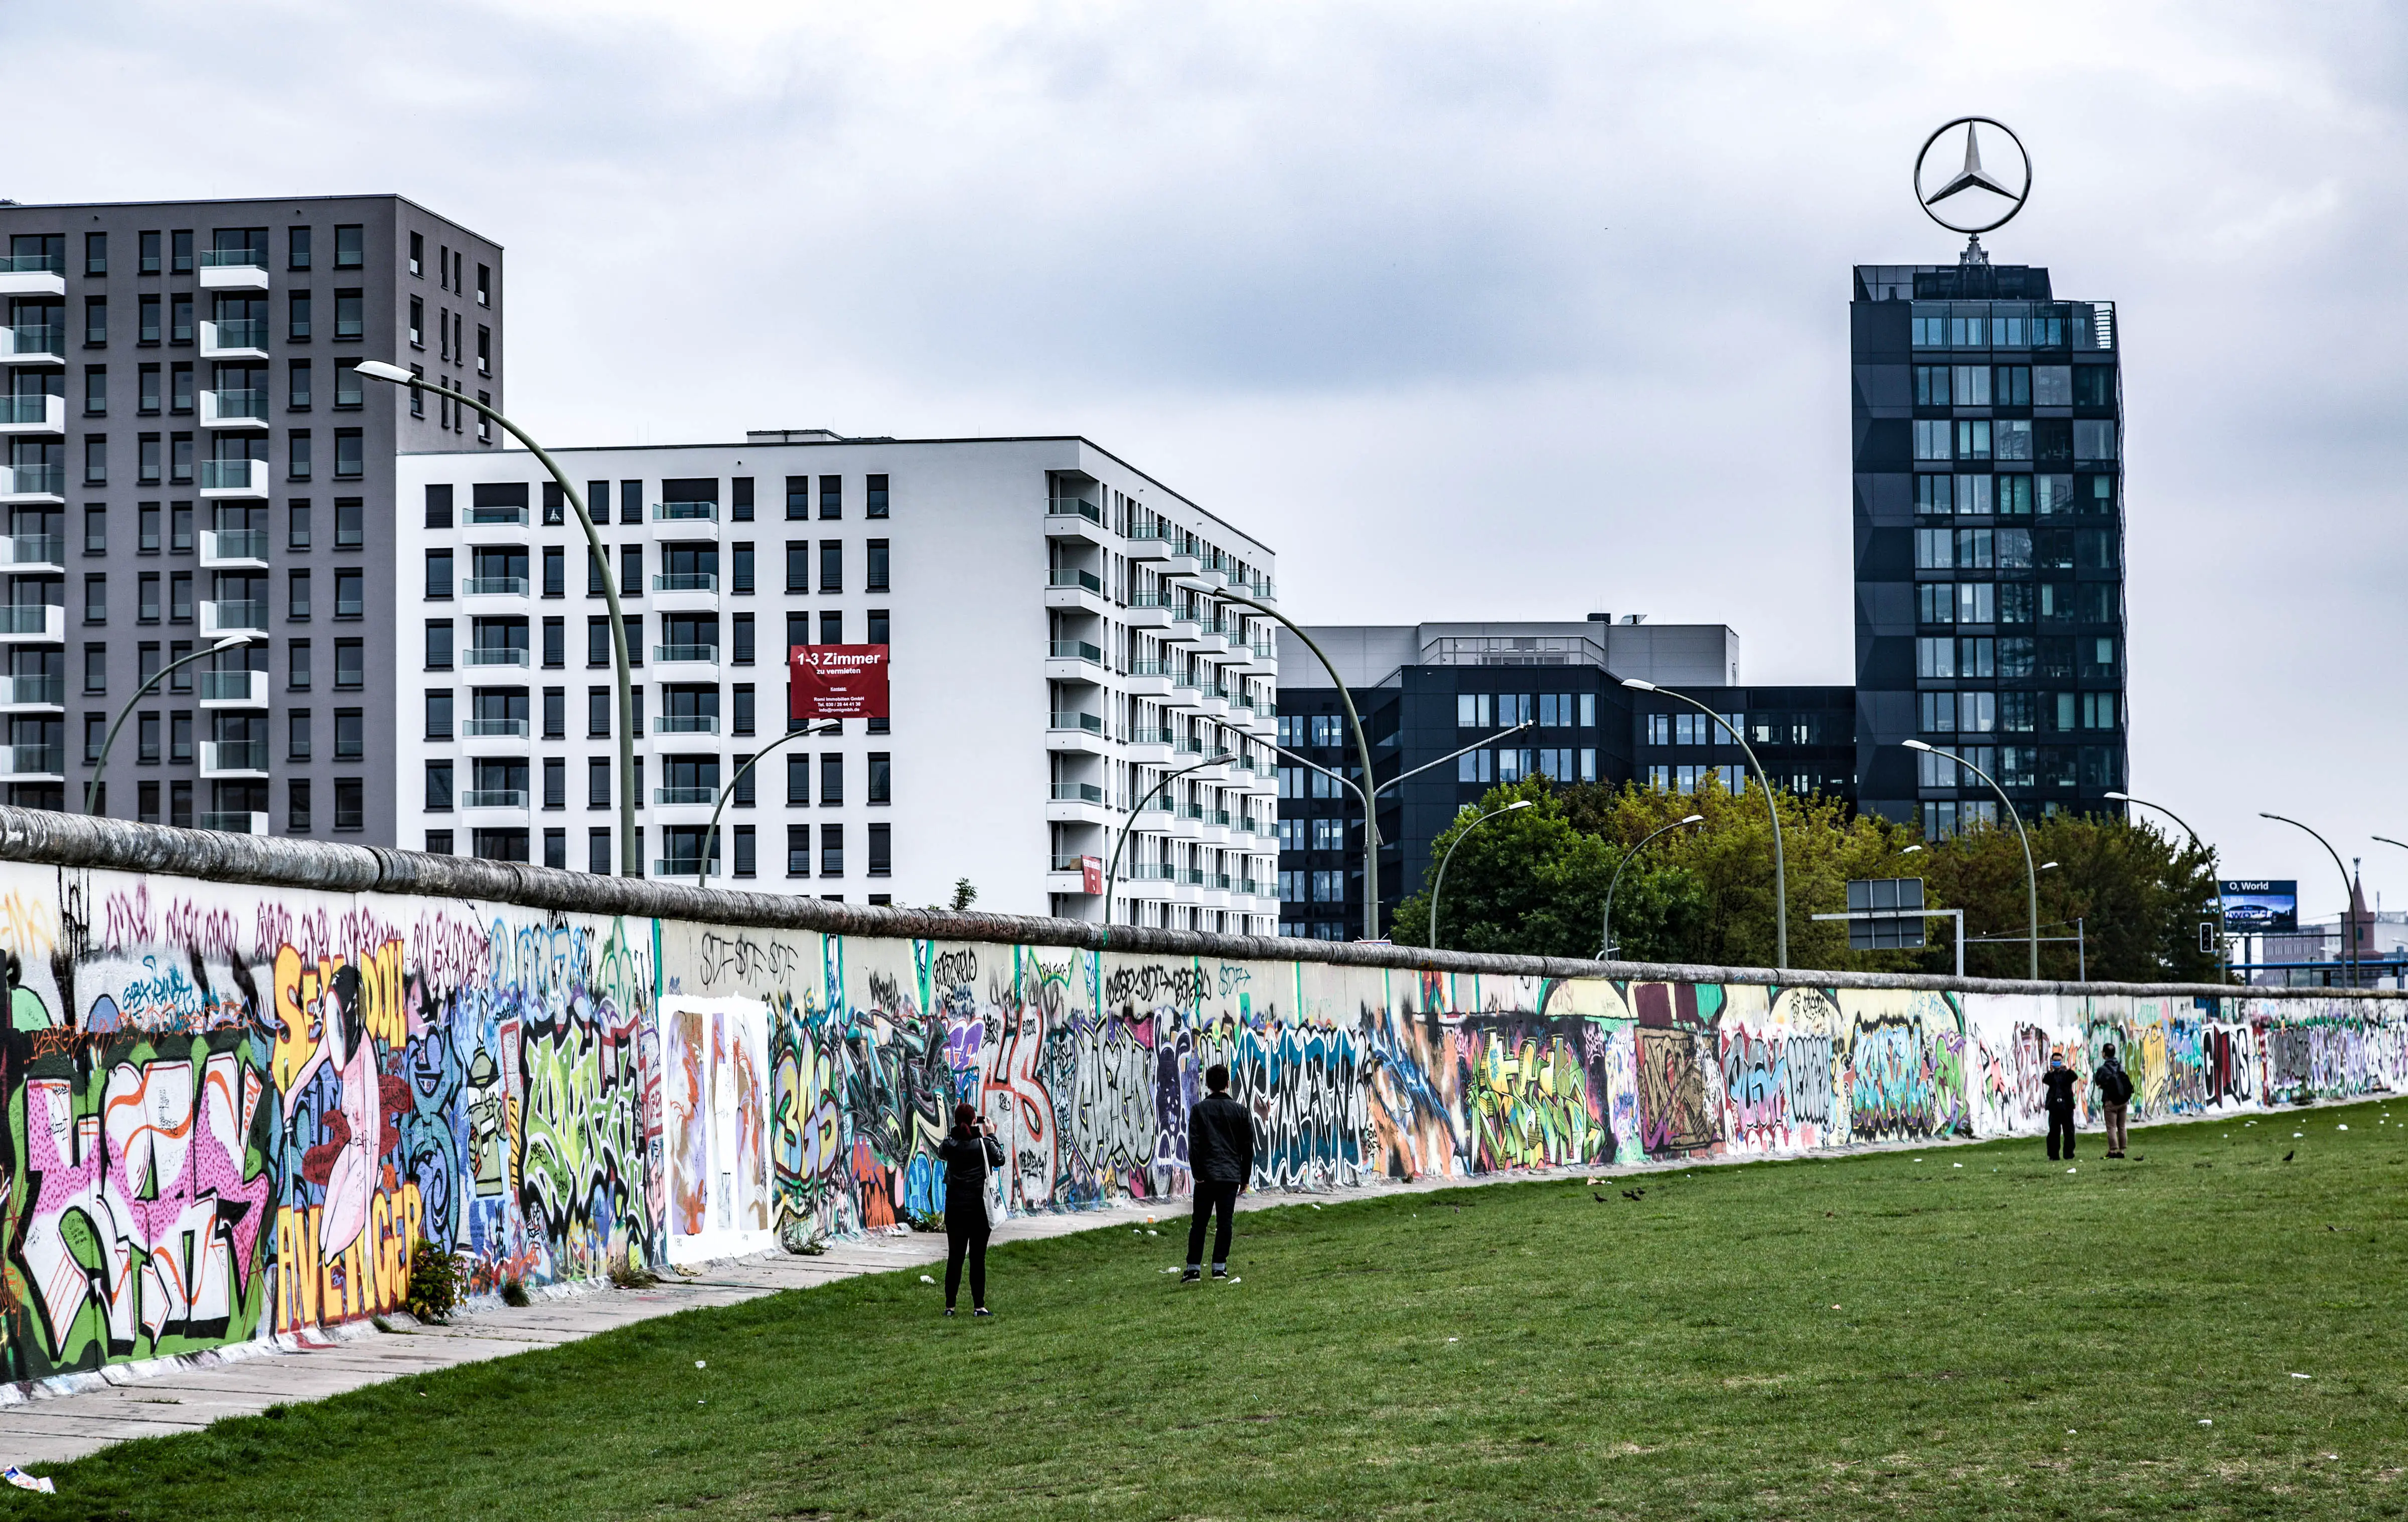 where to visit berlin wall